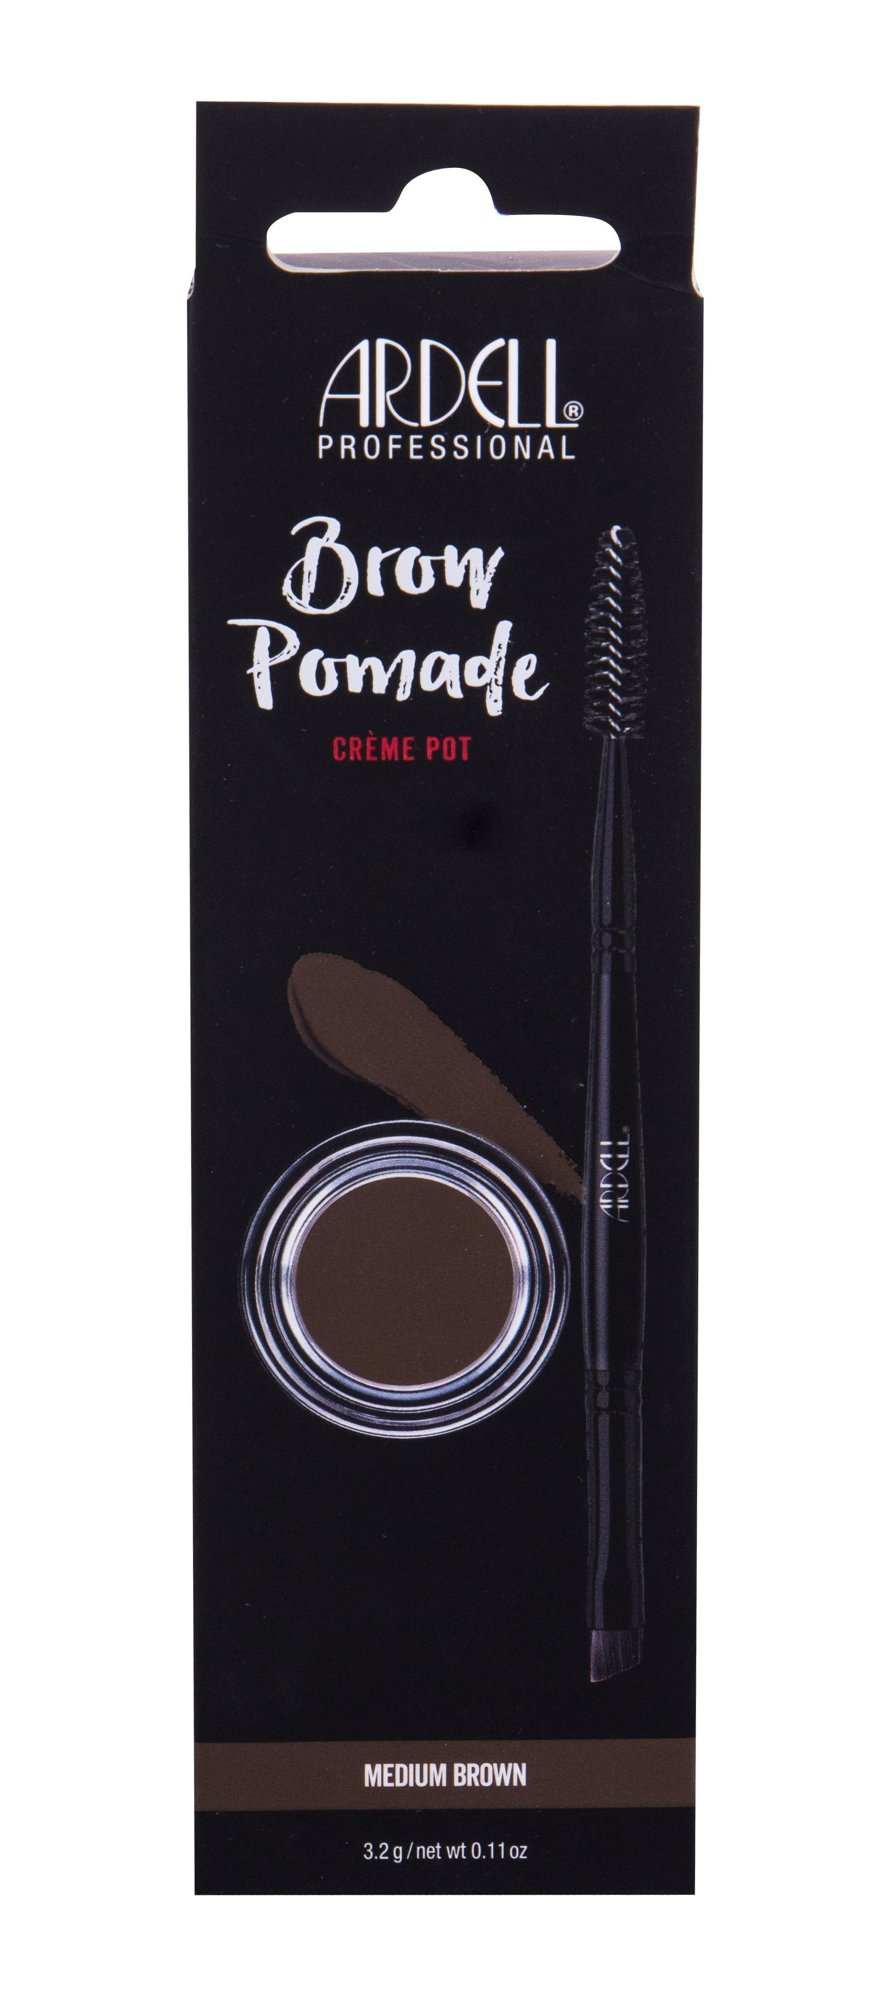 Ardell Brow Pomade